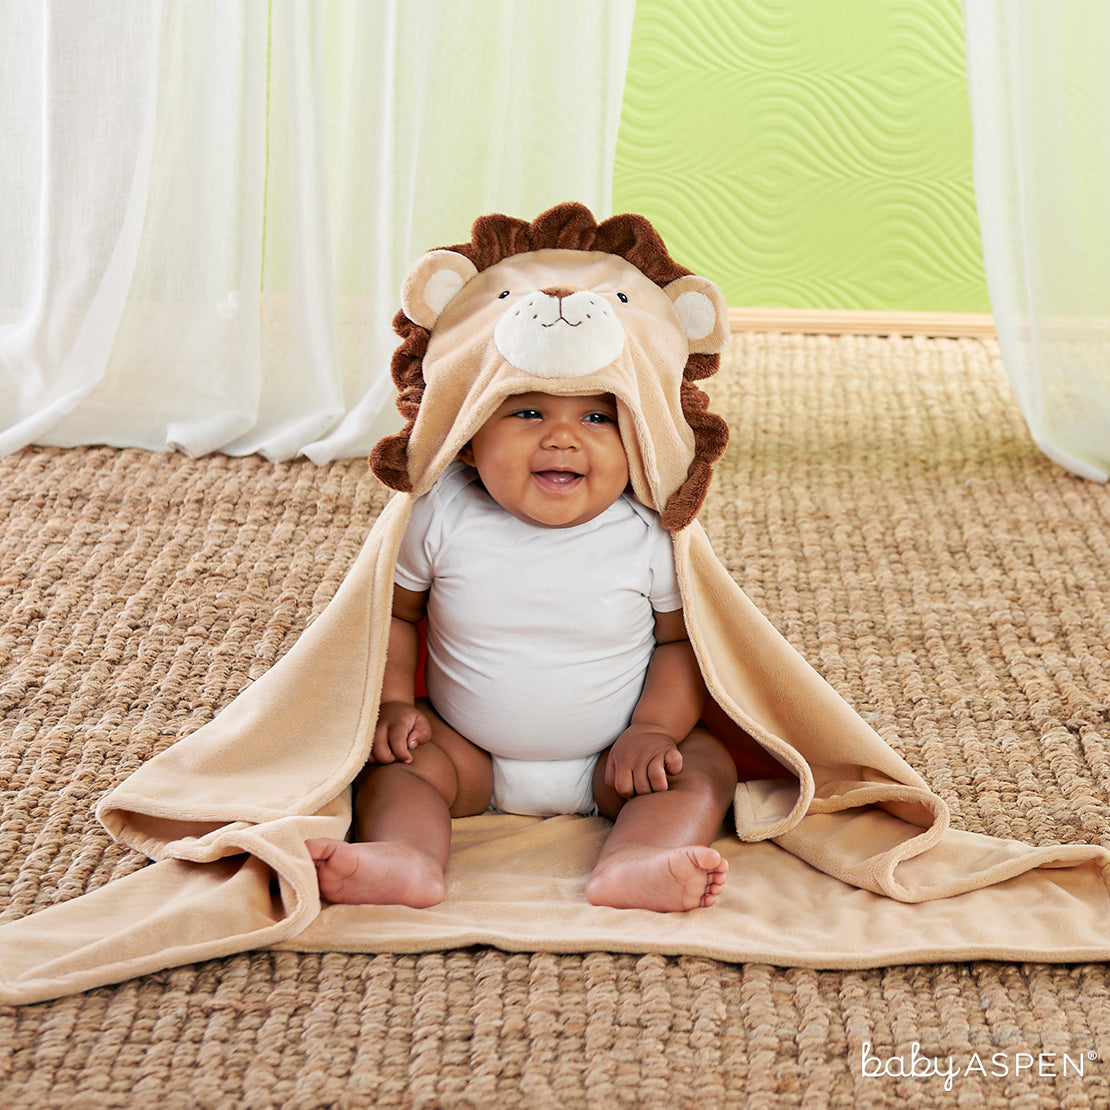 Lion Hooded Blanket | 9 Ideas to Keep Baby Warm This Winter | Baby Aspen